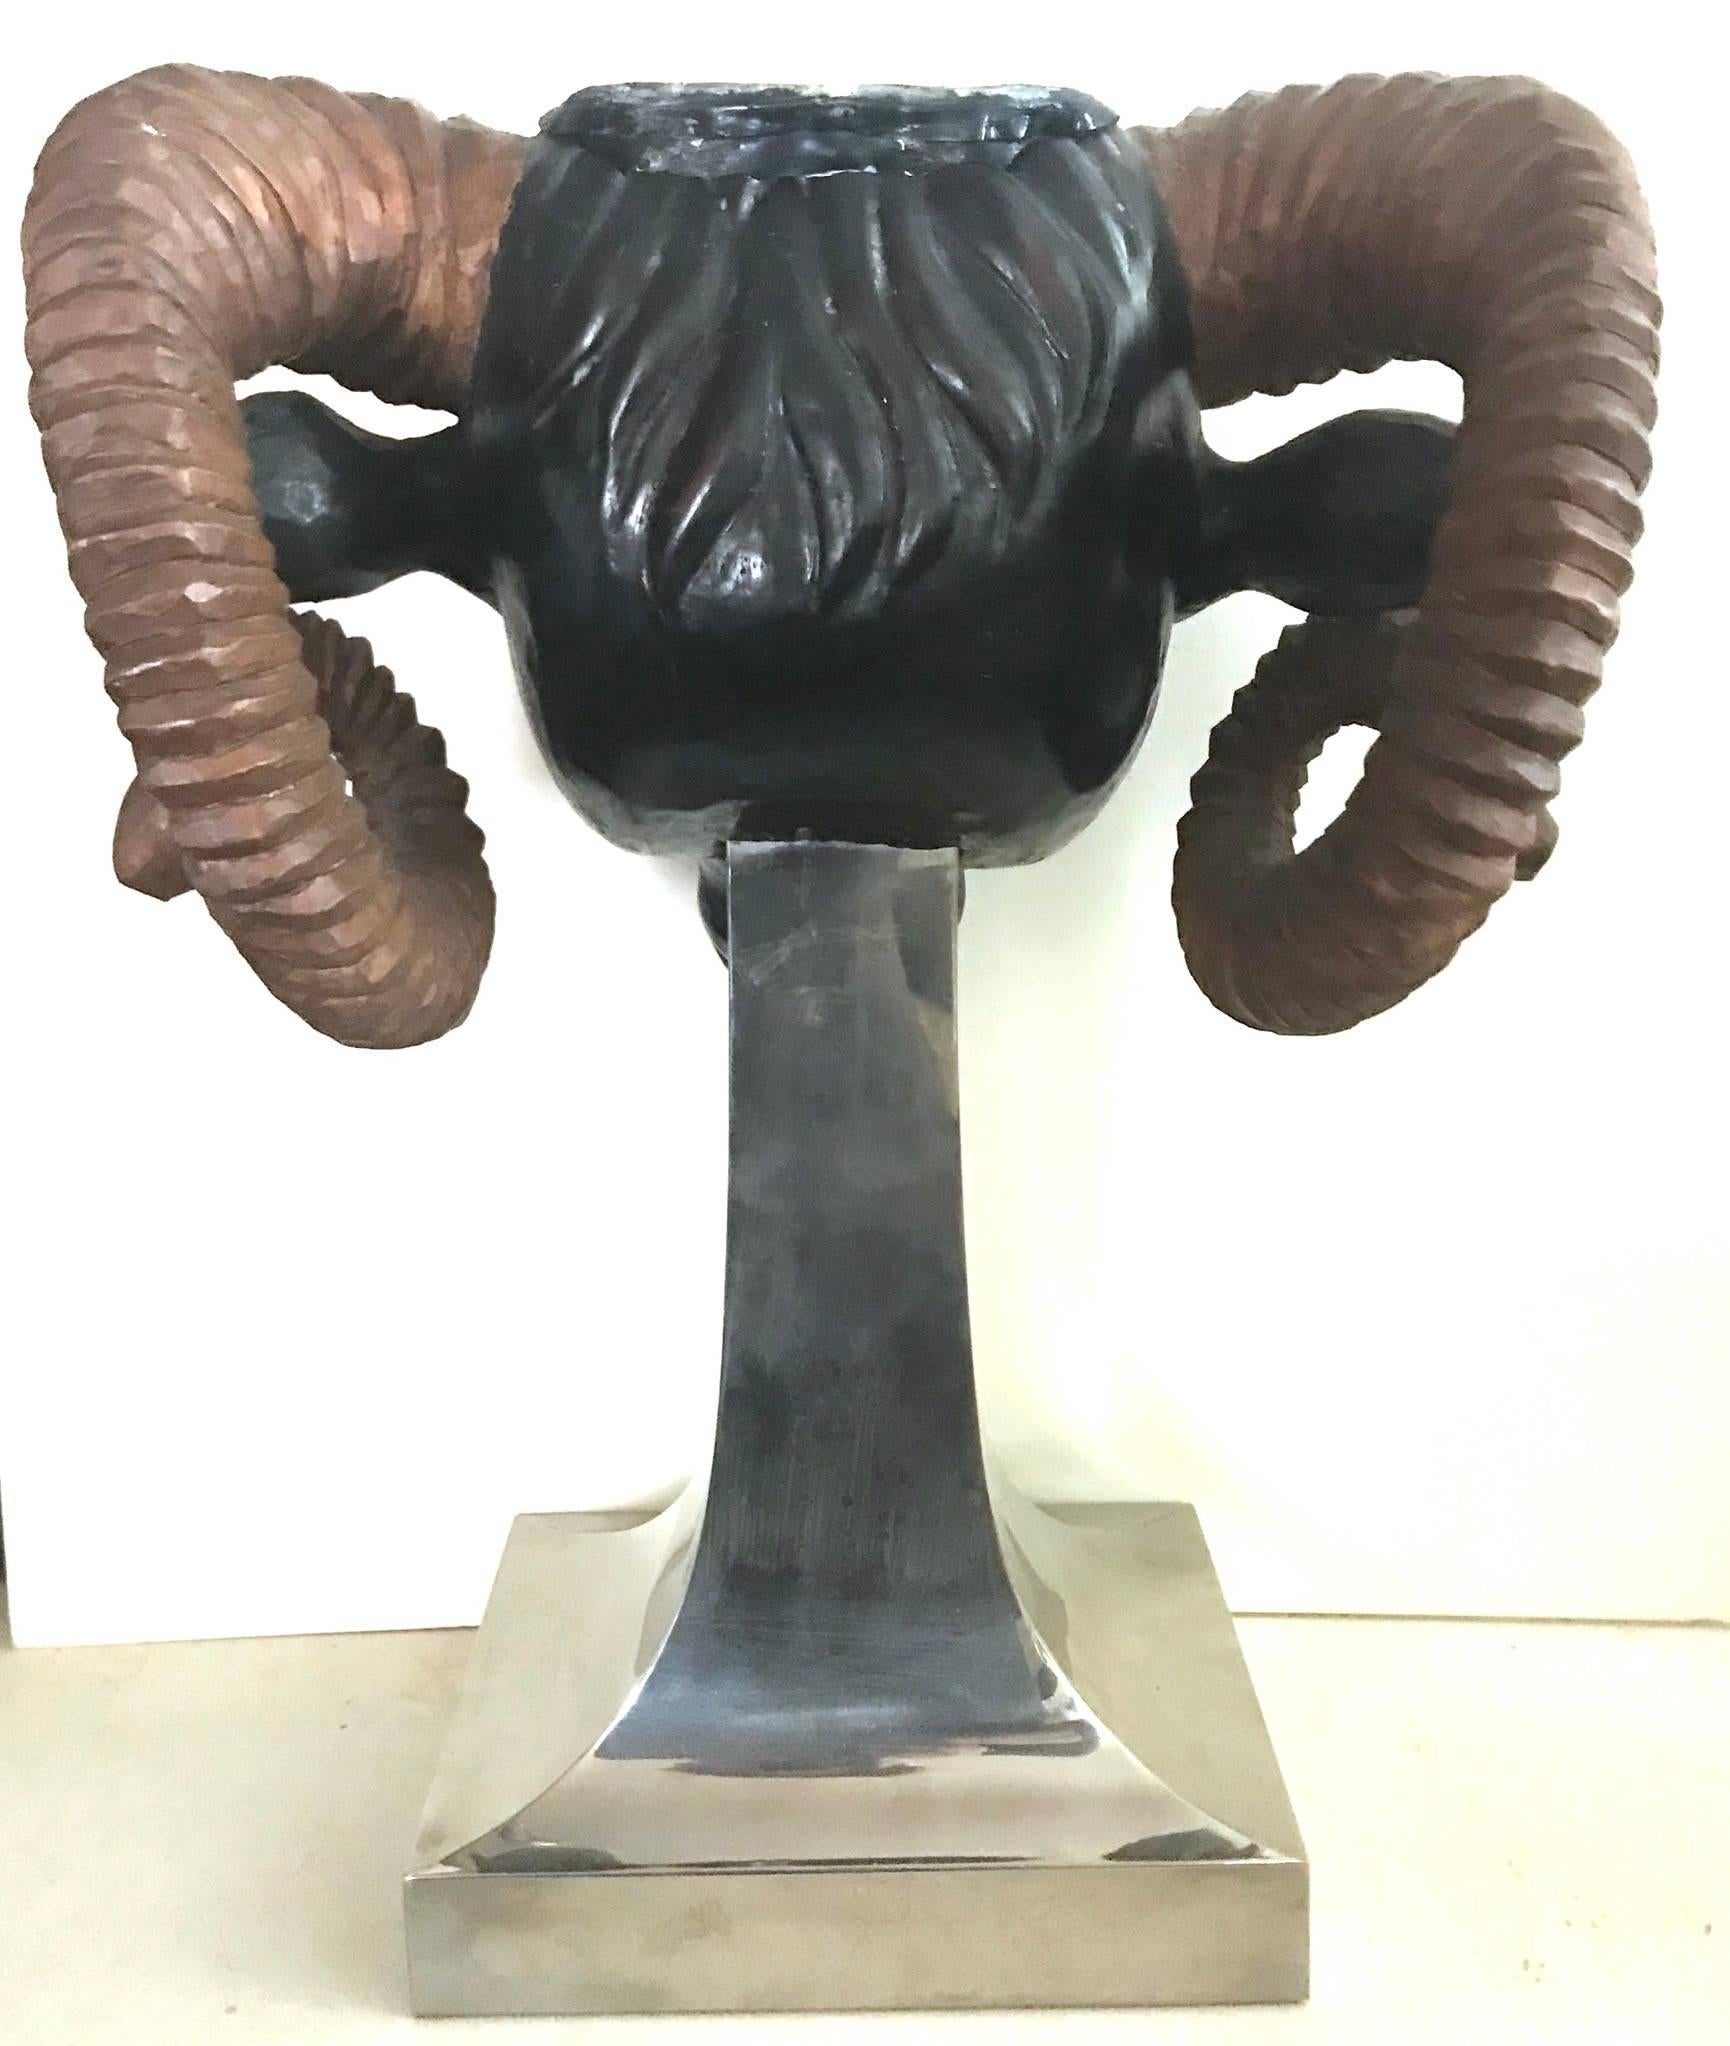 Rare 1970s Anthony Redmile Carved Ram’s Head Planter on Chrome Stand, England 1